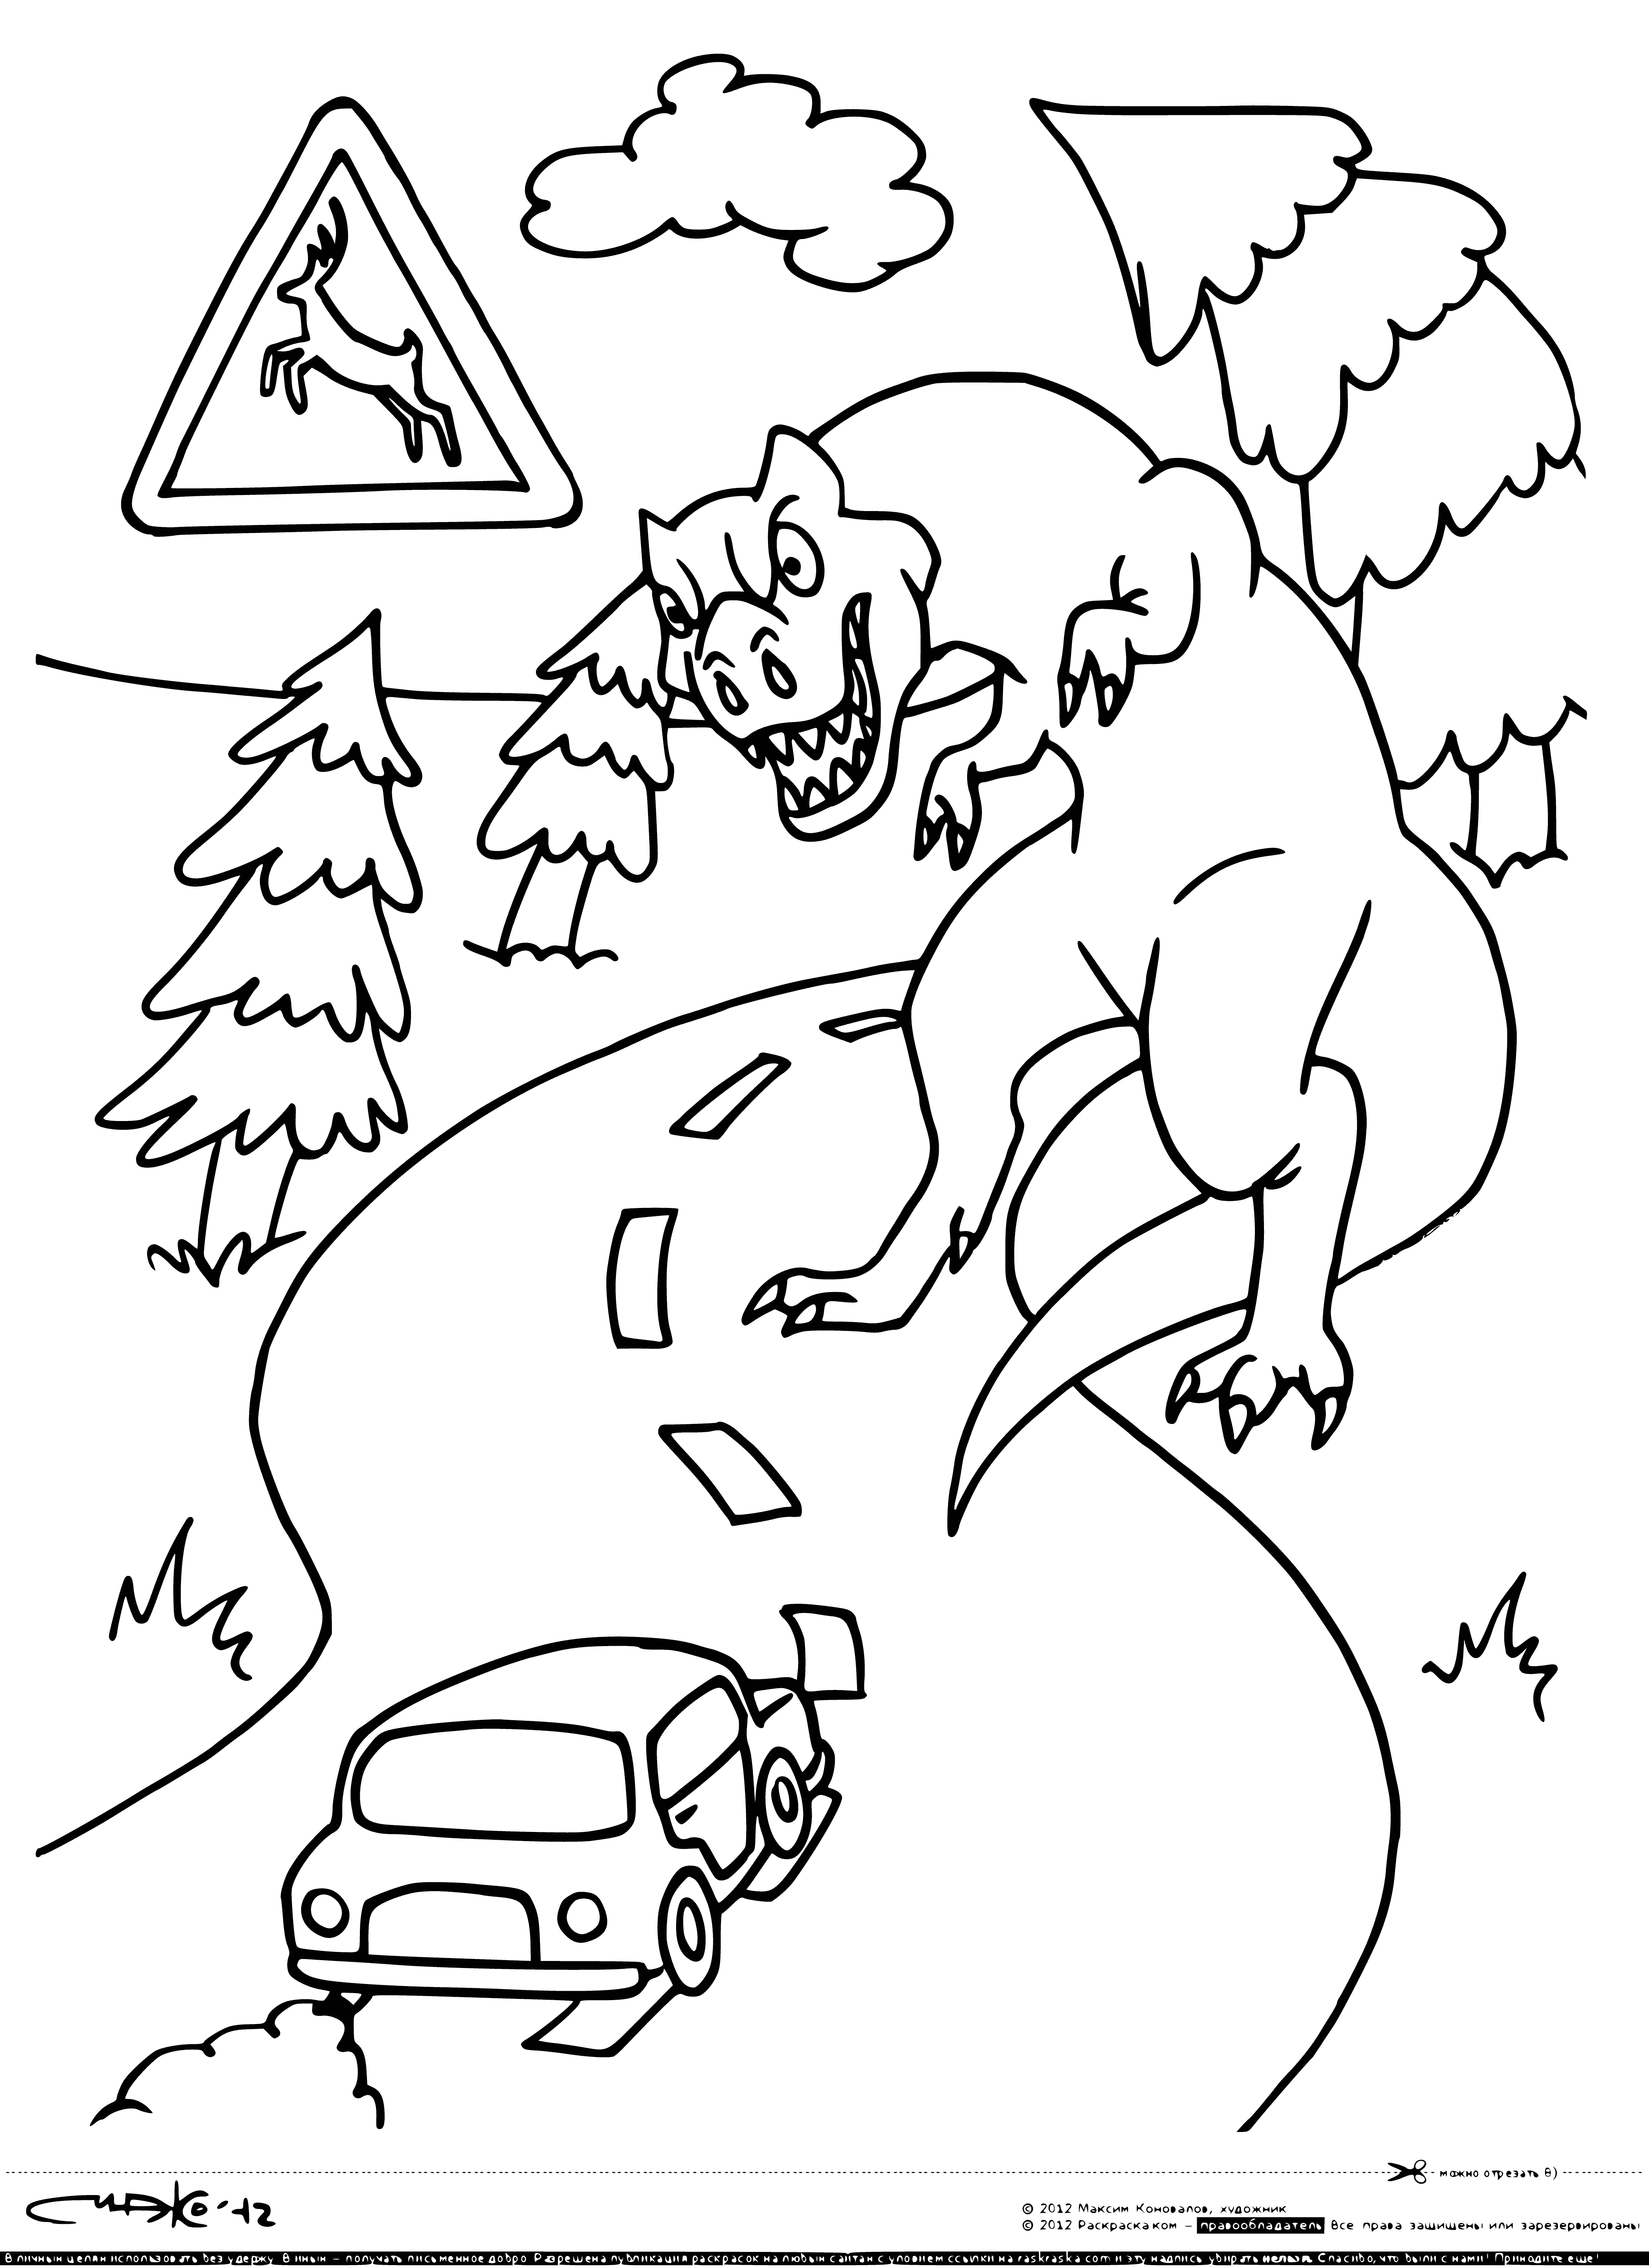 coloring page: 3 road signs depict: turning left, wild animals, no parking.